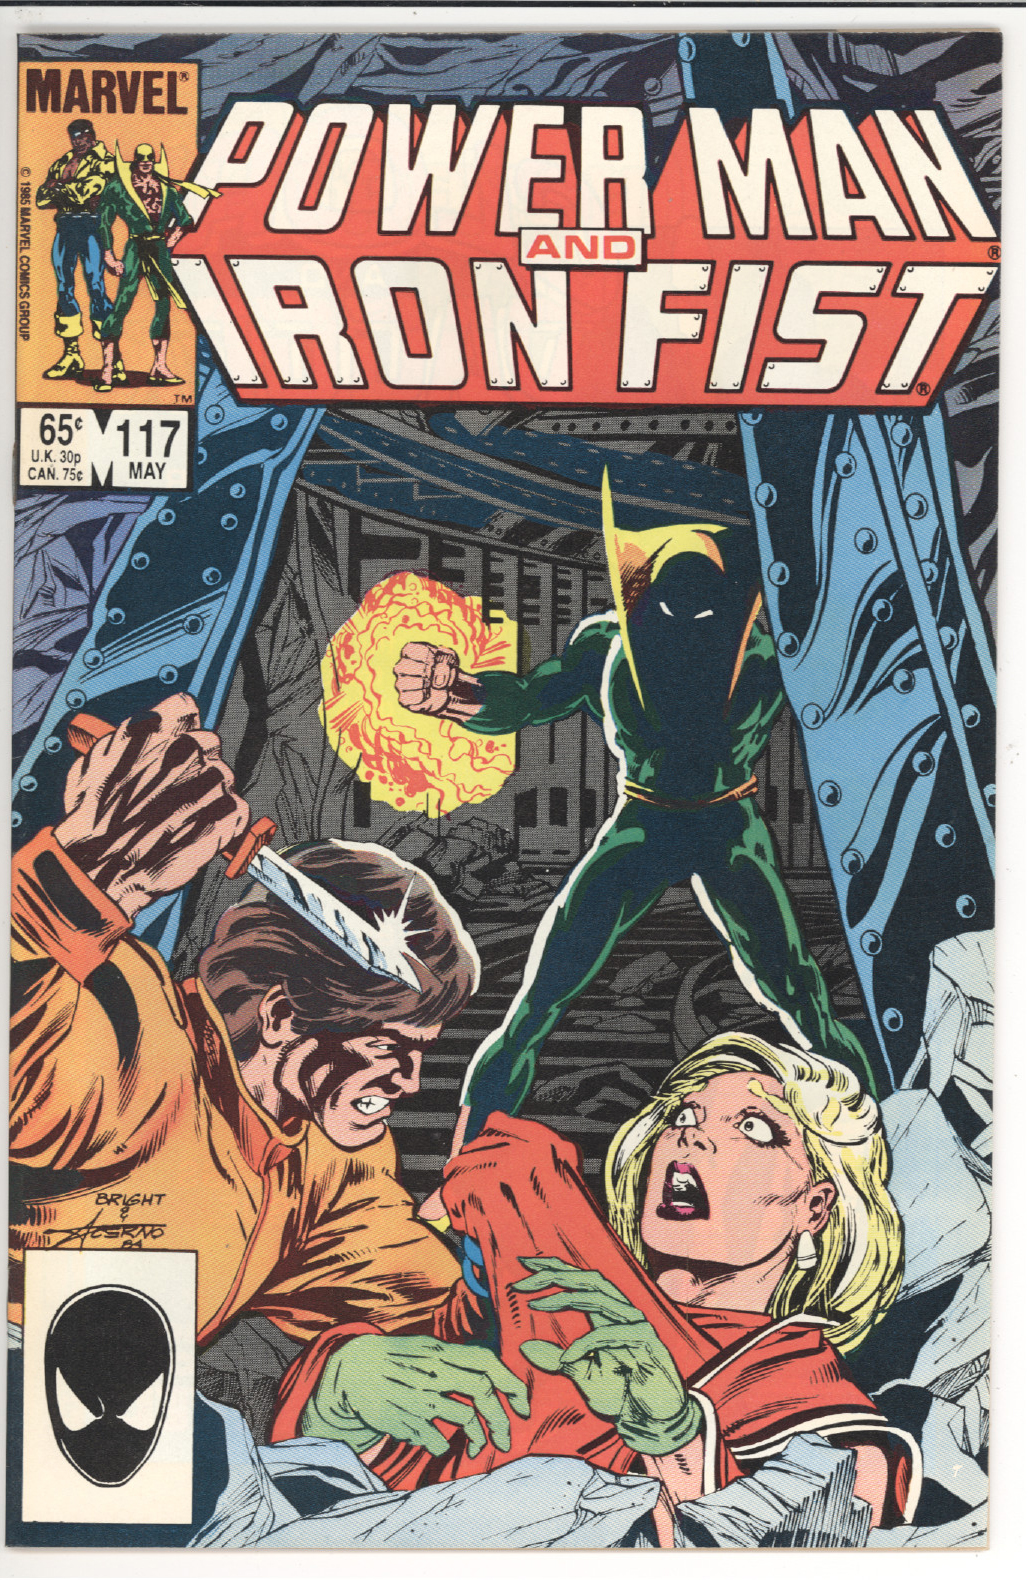 Power Man and Iron Fist #117